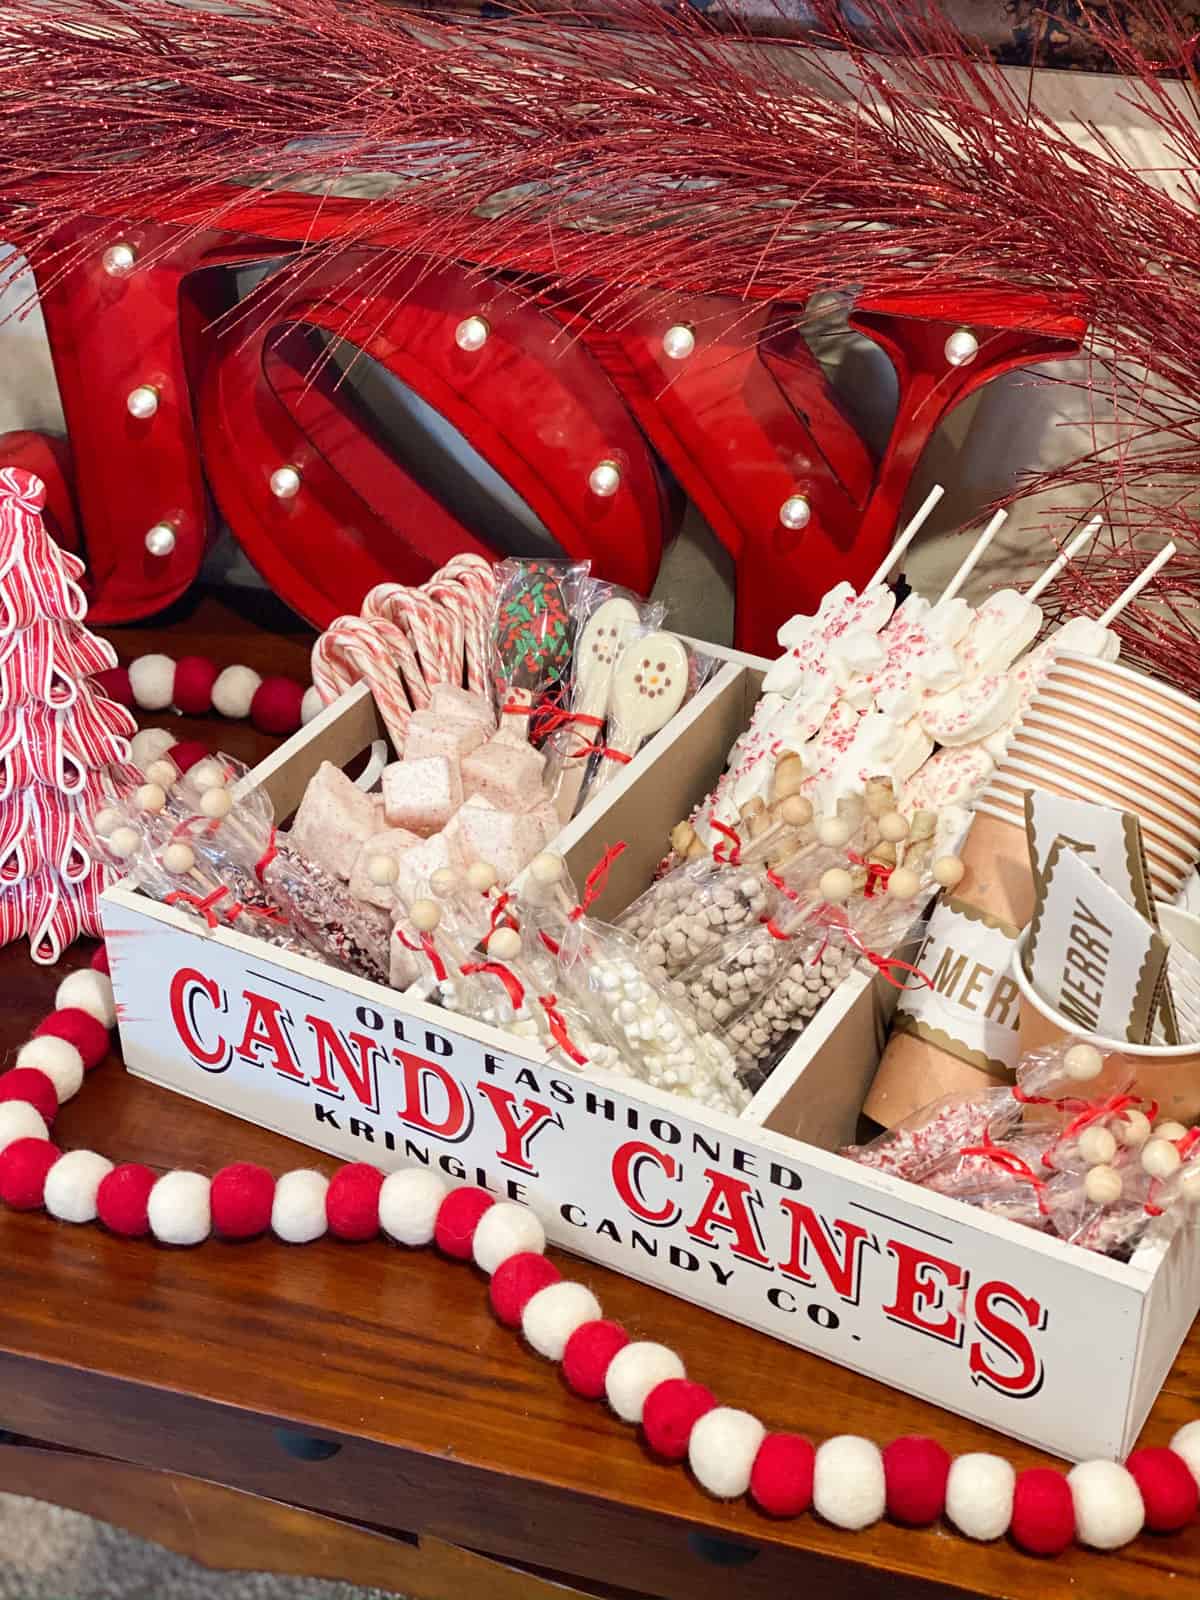 Hot cocoa bar with marshmallows, candy canes